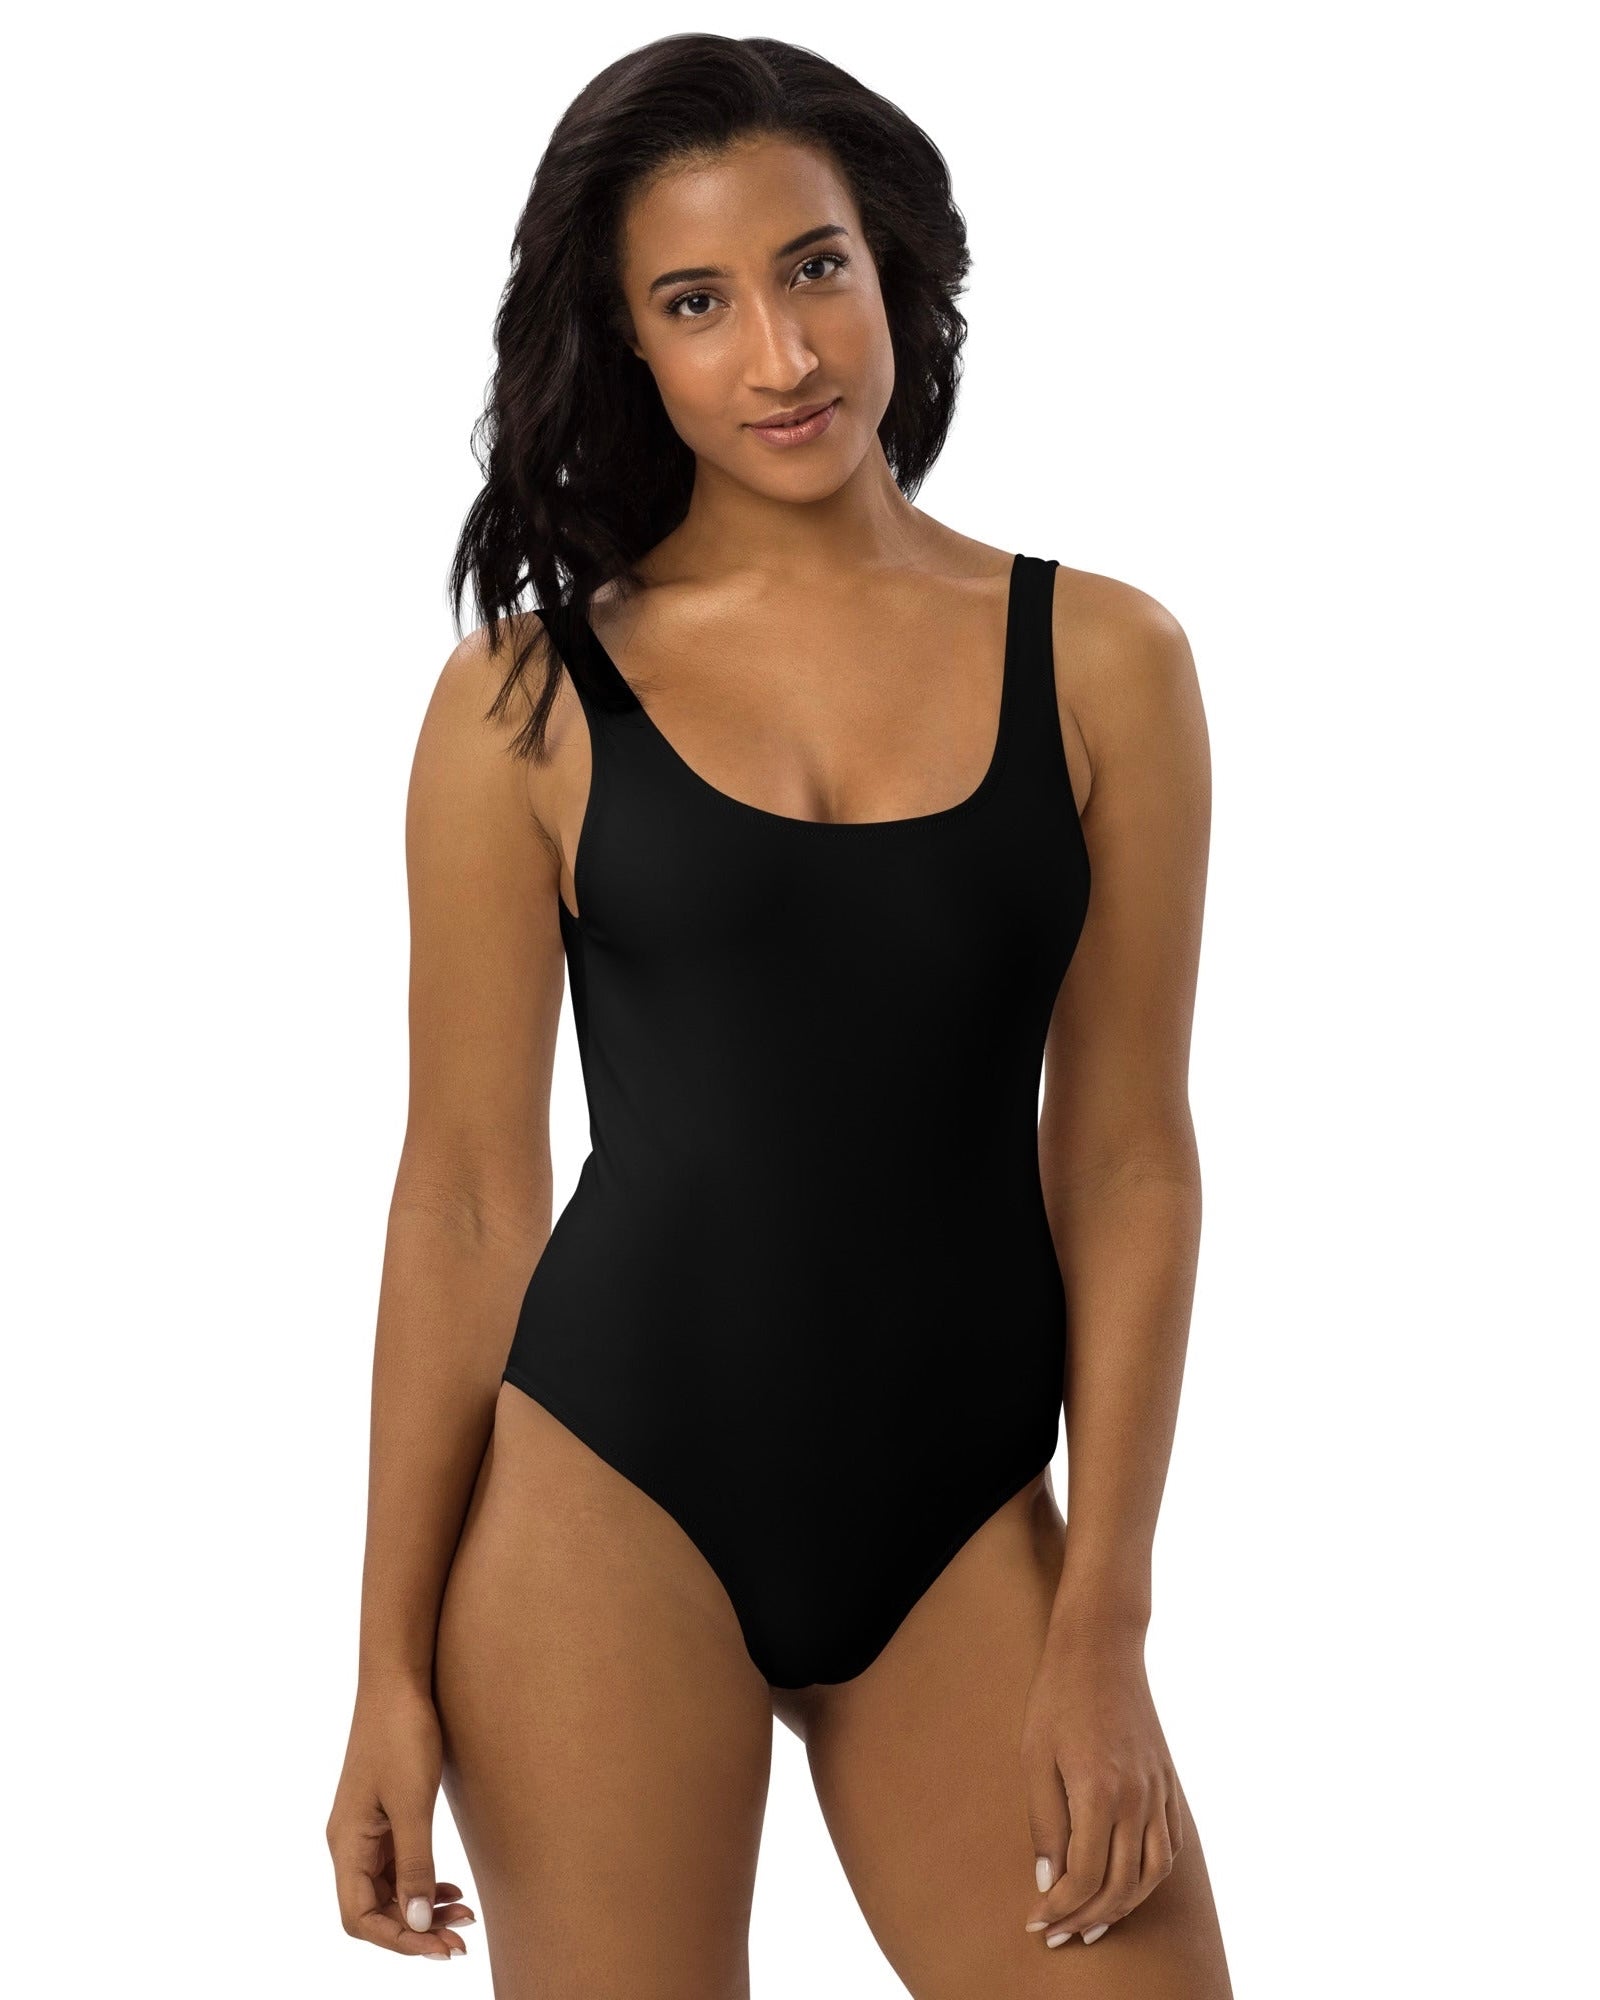 Off With Your Head Bodysuit(rave bodysuit, rave outfit, women's rave wear,  festival outfit, festival bodysuit, rave one piece) sold by Umbilical  Evania, SKU 40420954